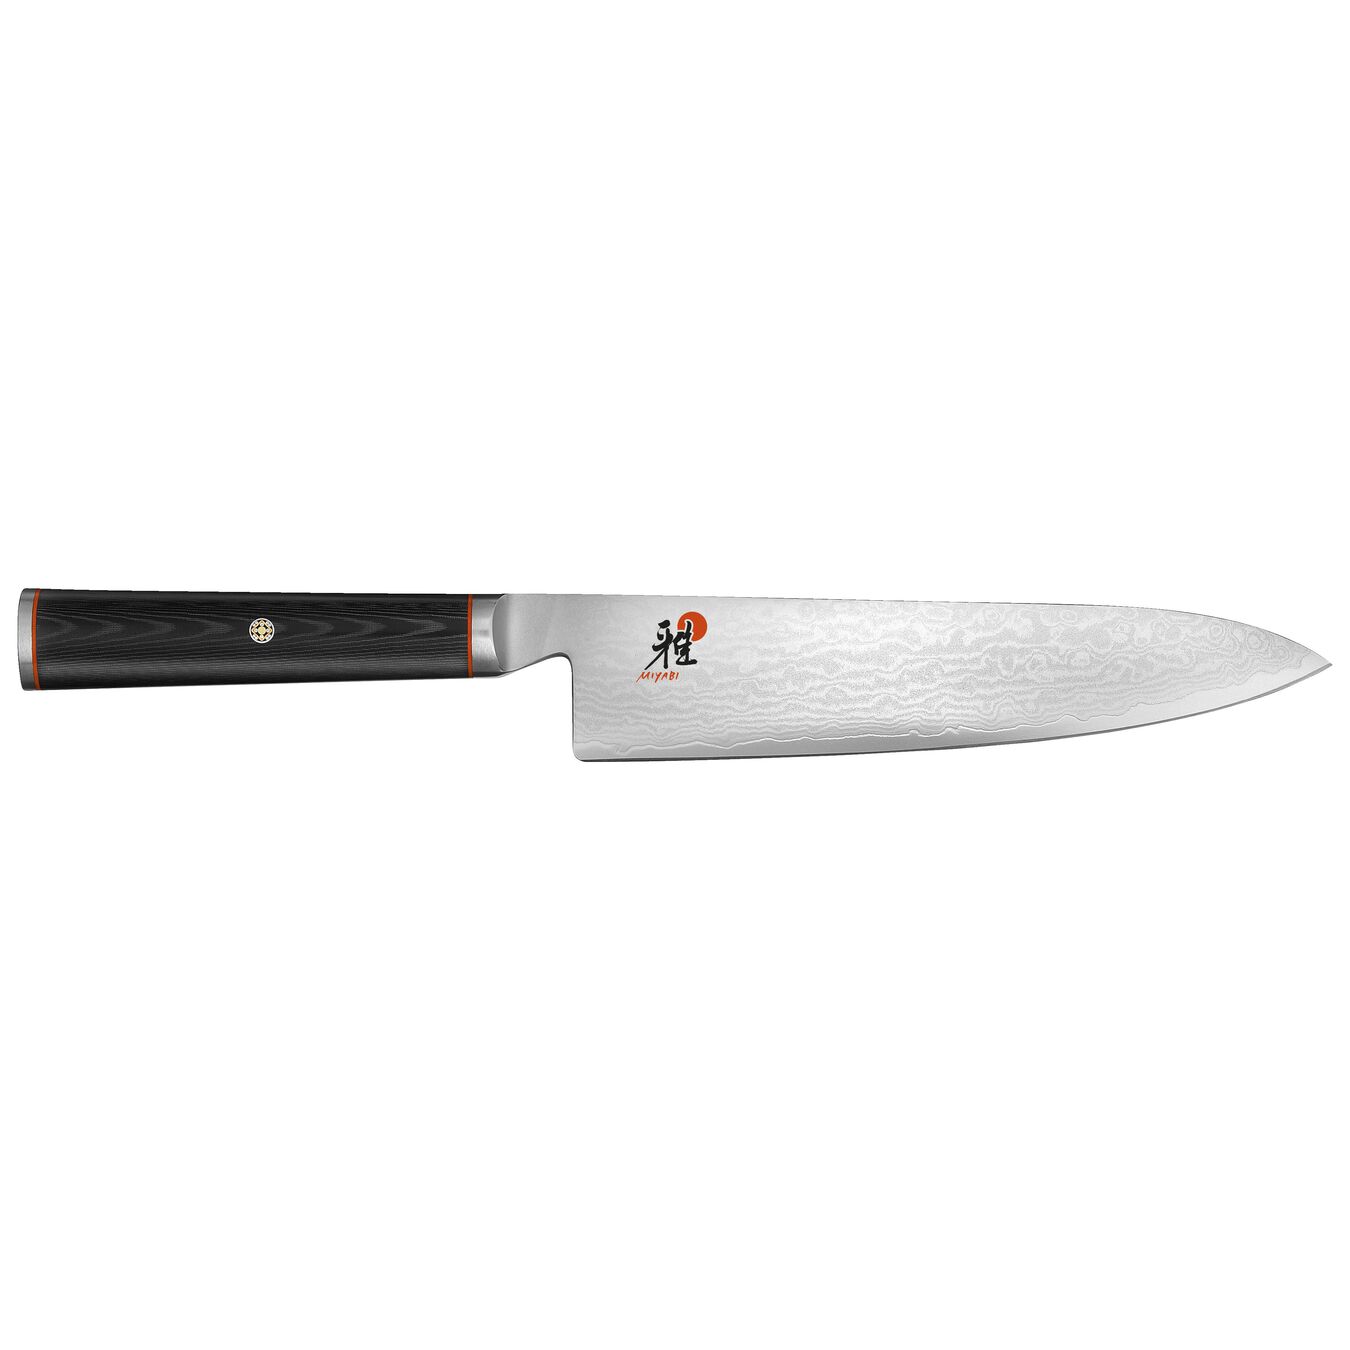 8-inch, Chef's Knife,,large 2